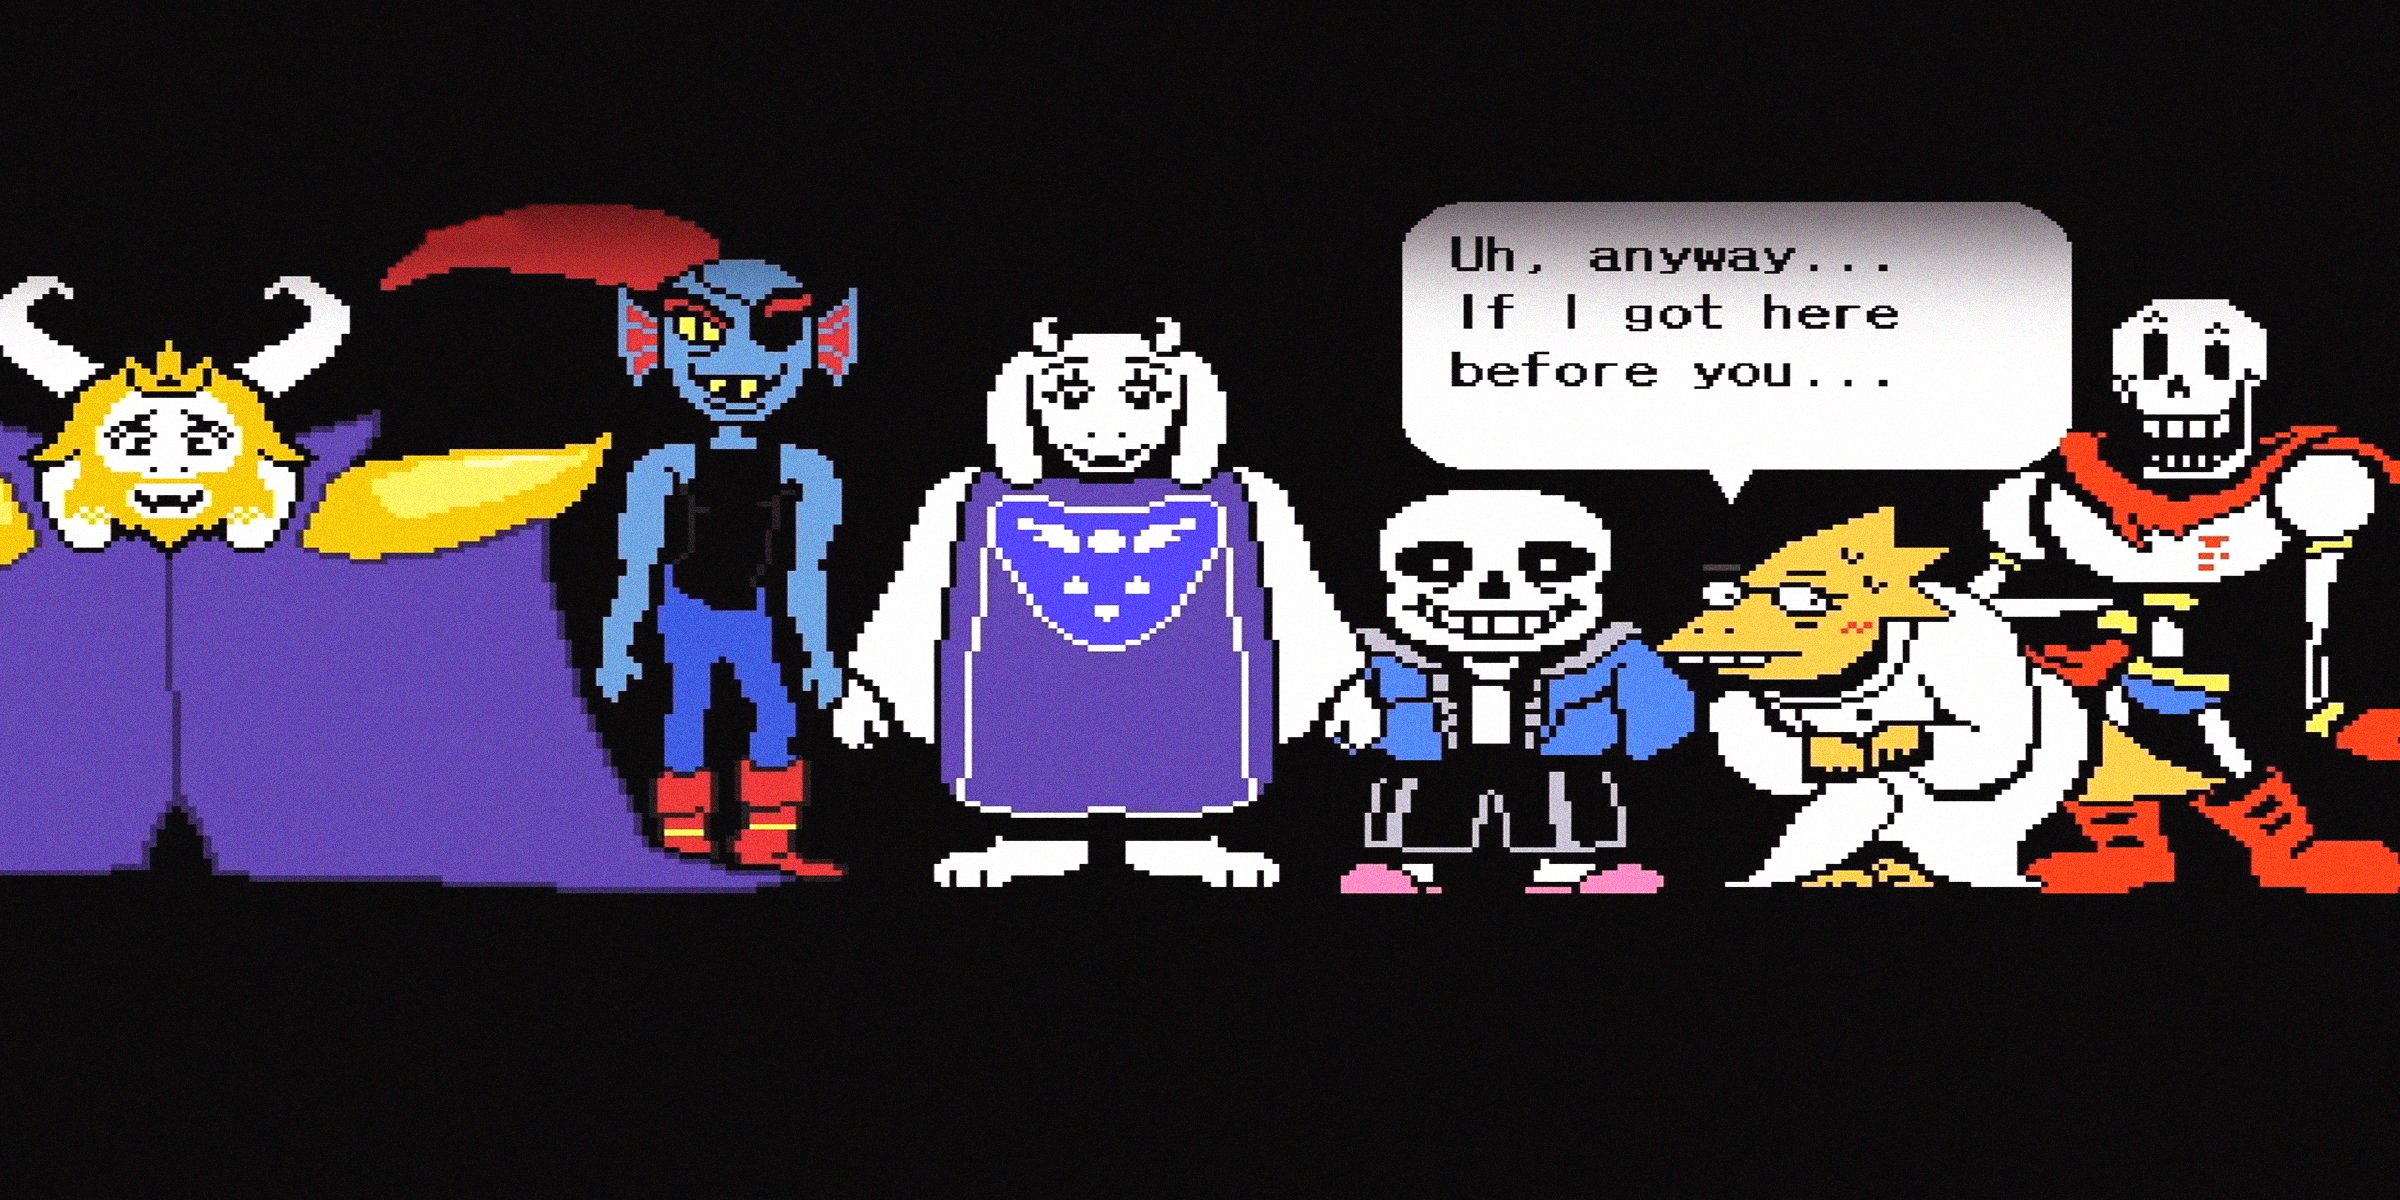 Monsters from the 'Undertale' game with one of them called Alphys saying, "Uh, anyway...if I got here before you..." | Source: youtube.com/ProsafiaGaming